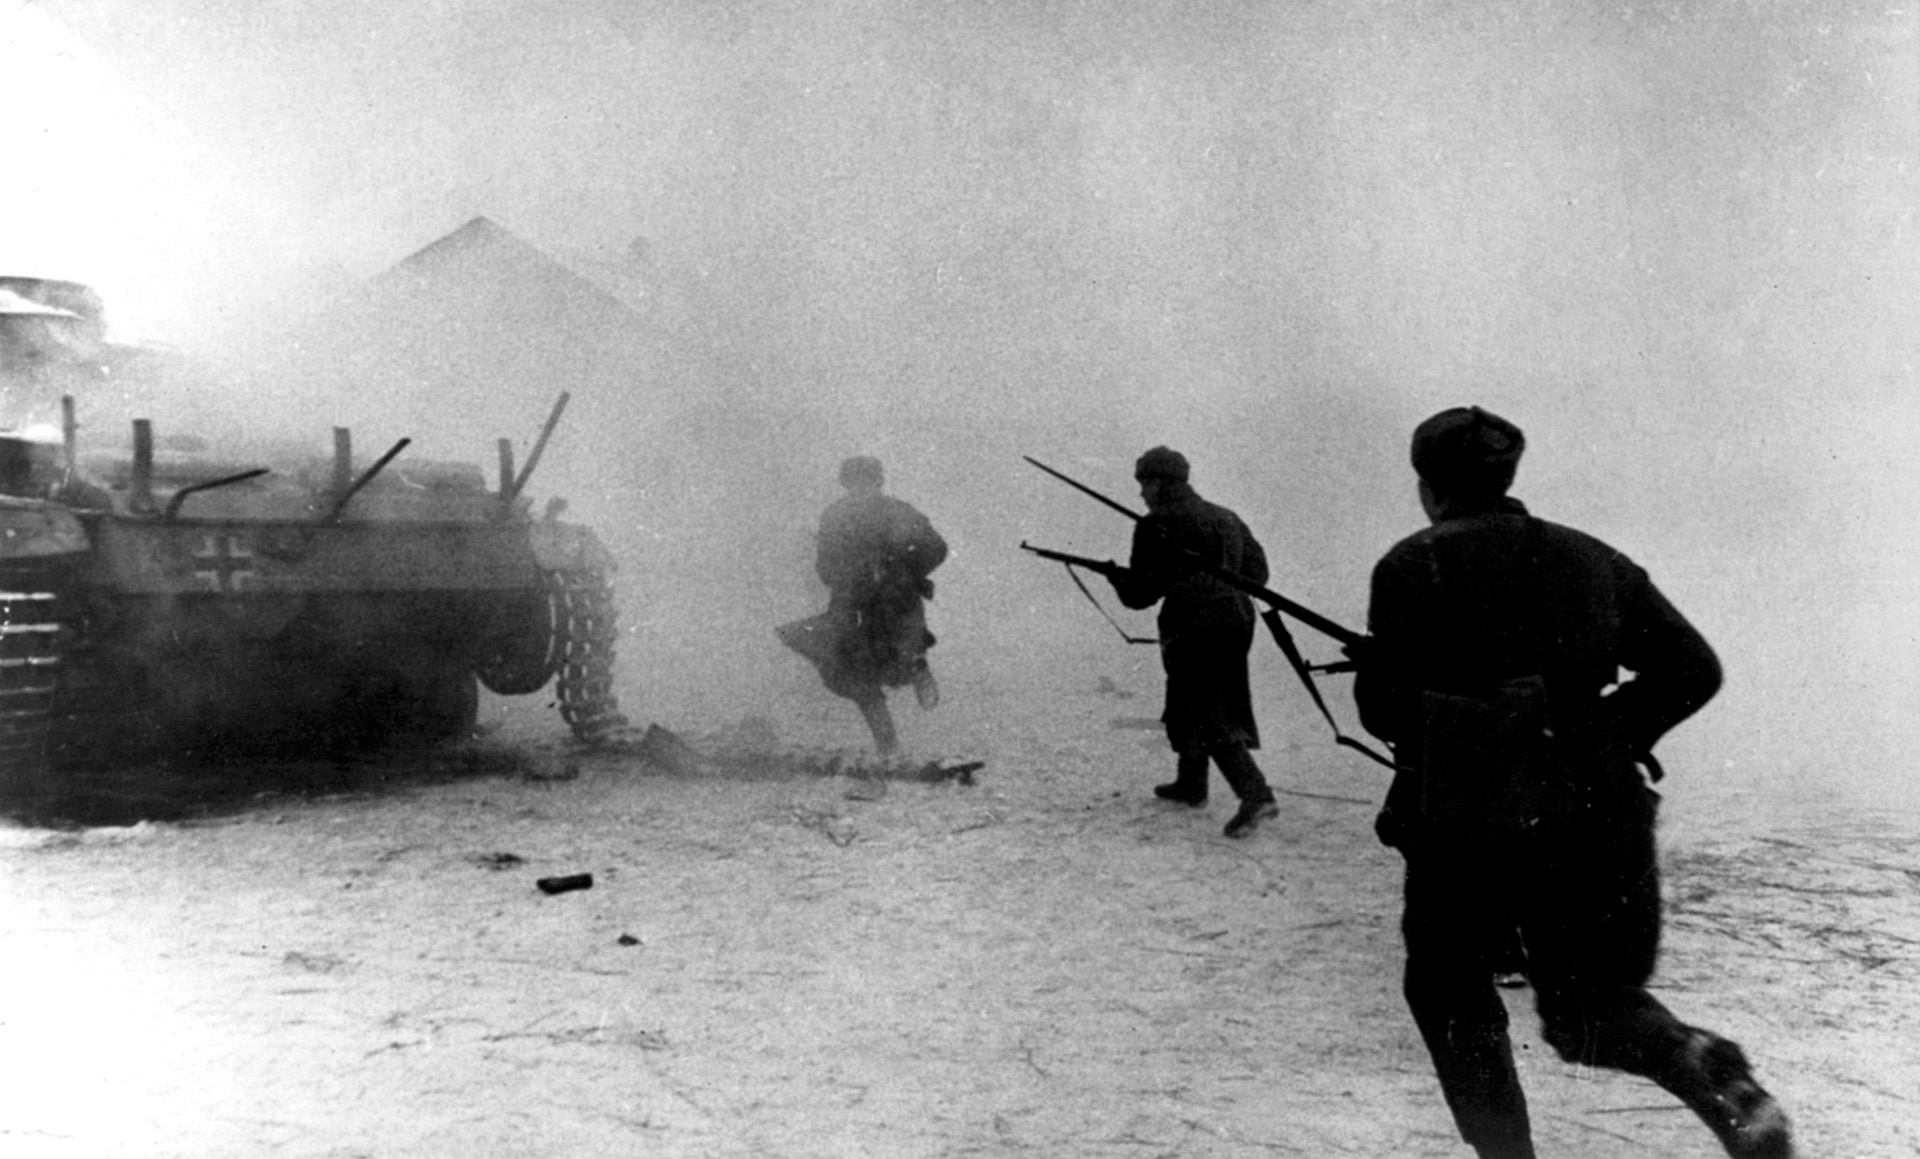 Hurrying past a smoldering German tank, Red Army soldiers plunge into the haze of combat with their rifles at the ready.